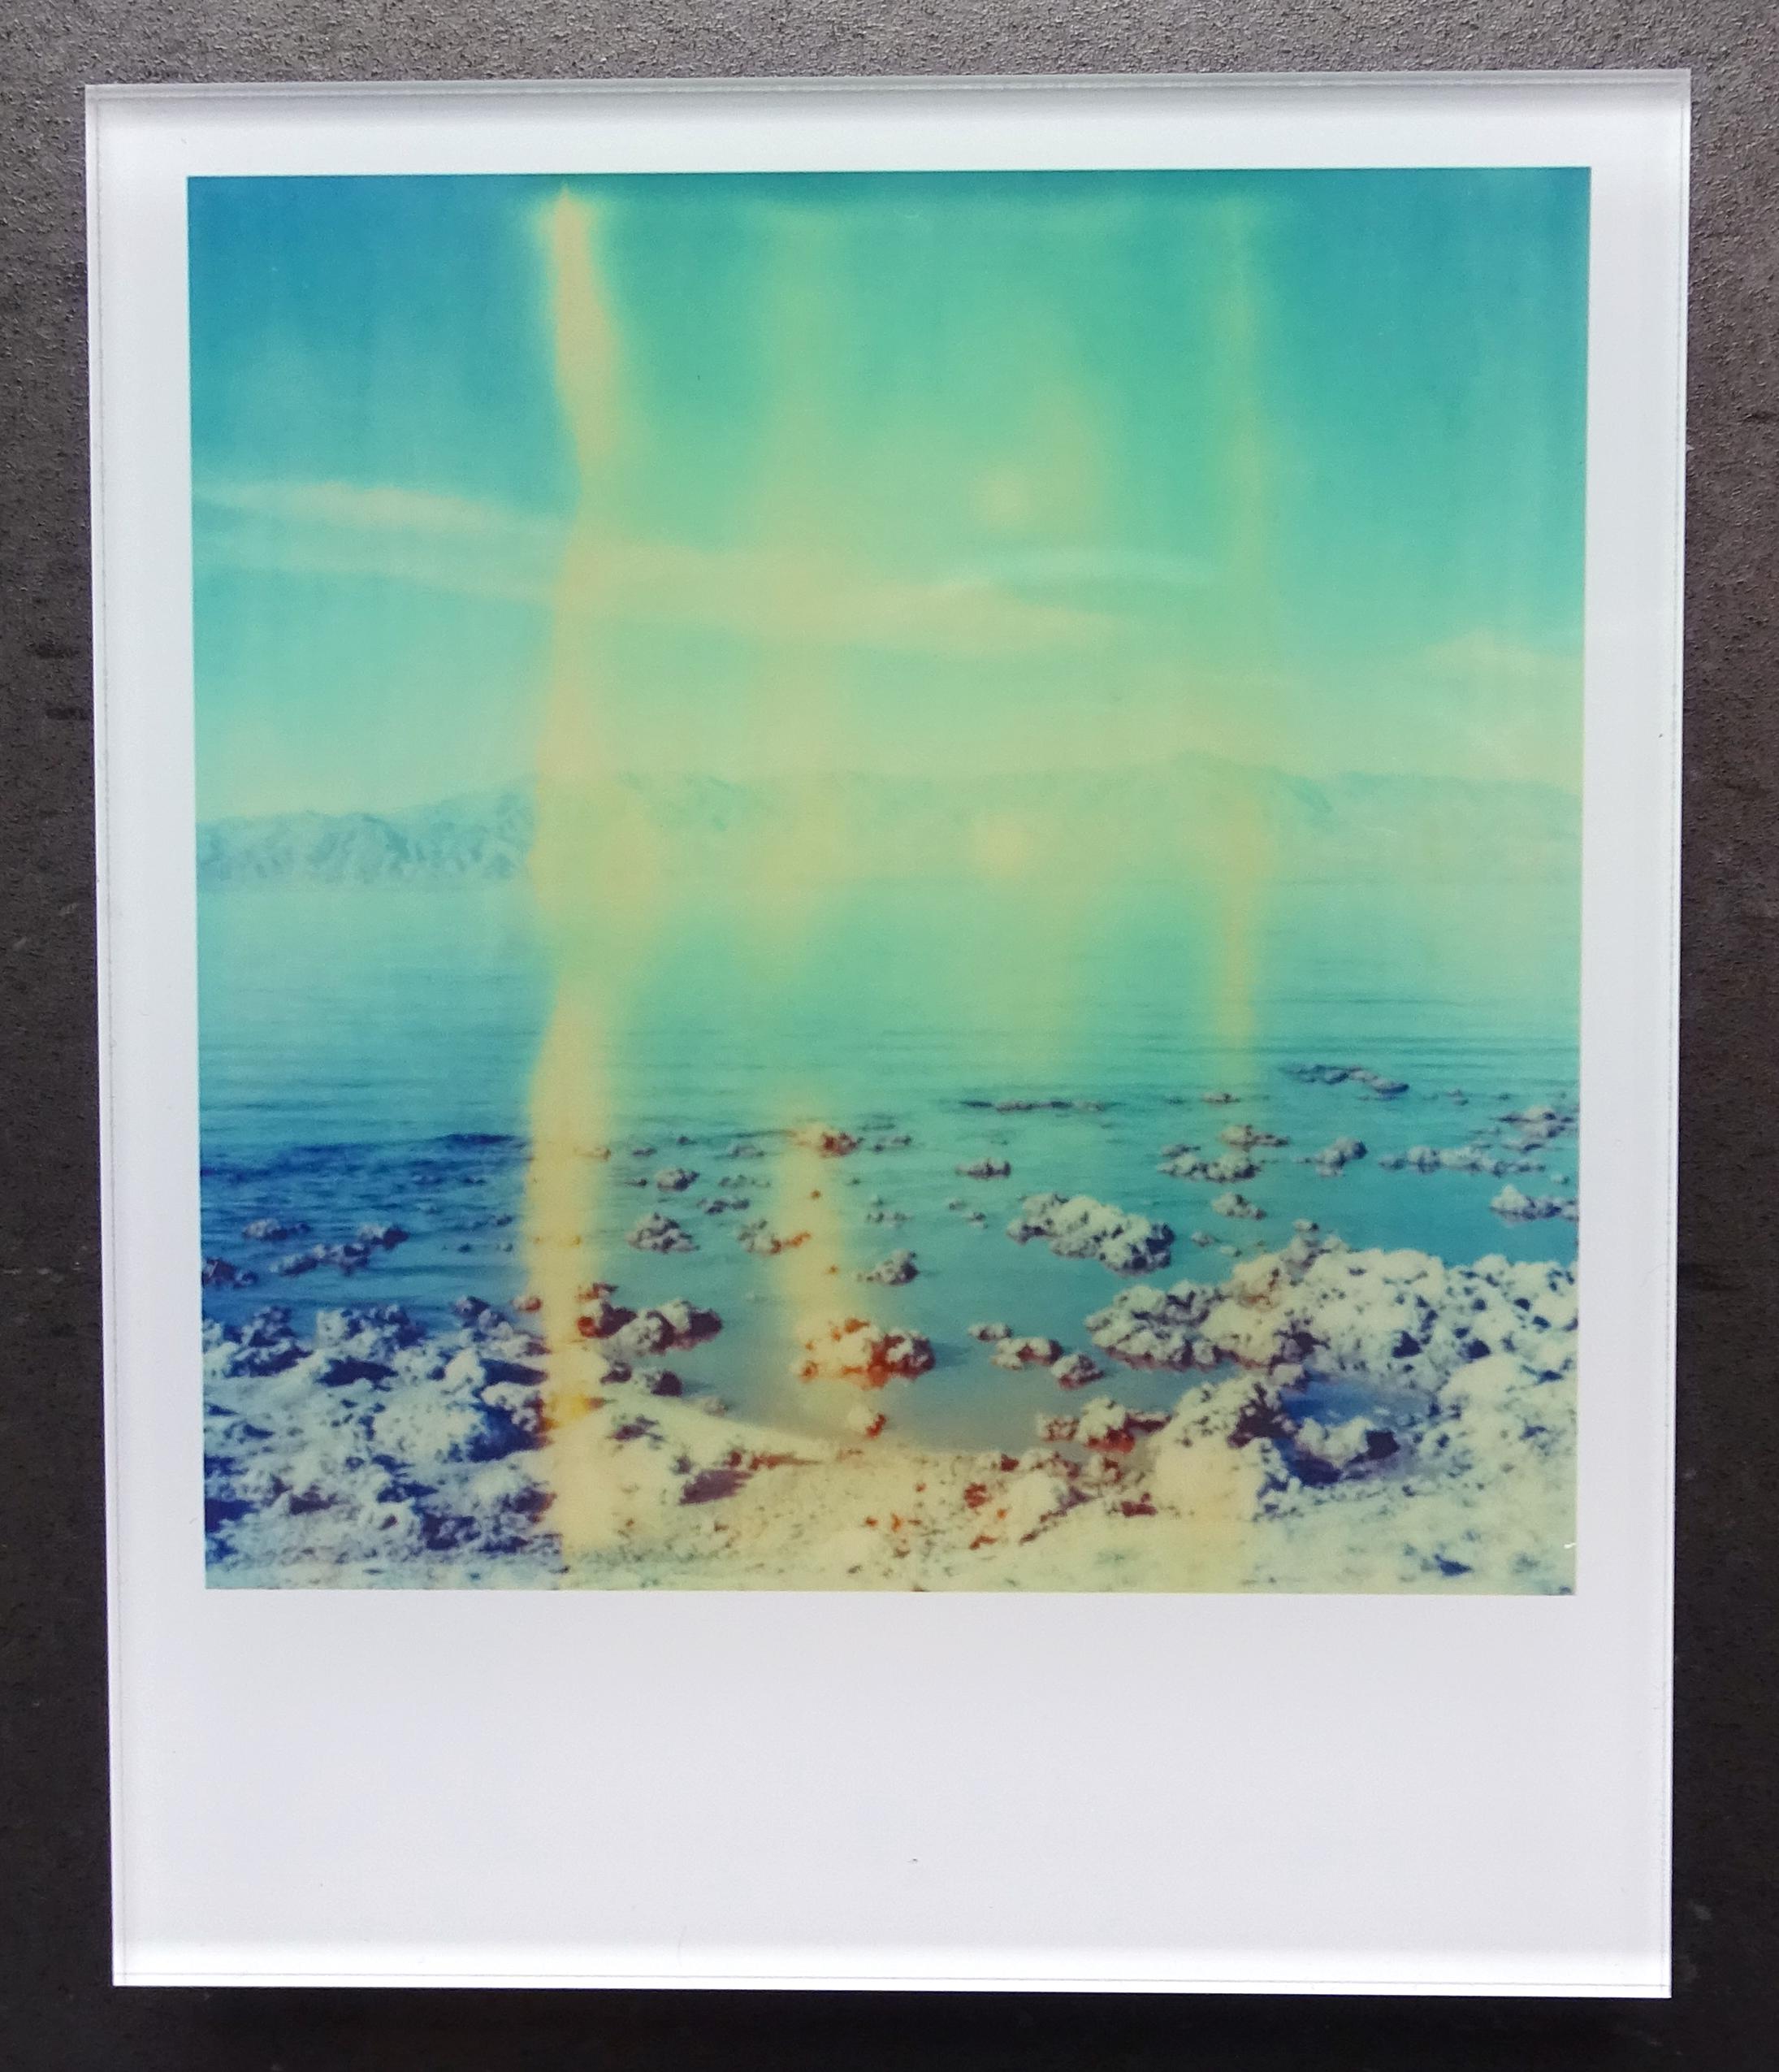 Stefanie Schneider's Minis
Salt'n Sea (California Badlands) - 2010

Signed and signature brand on verso.
Lambda digital Color Photographs based on a Polaroid.
Sandwiched in between Plexiglass (thickness 0.7cm)

Polaroid sized open Editions